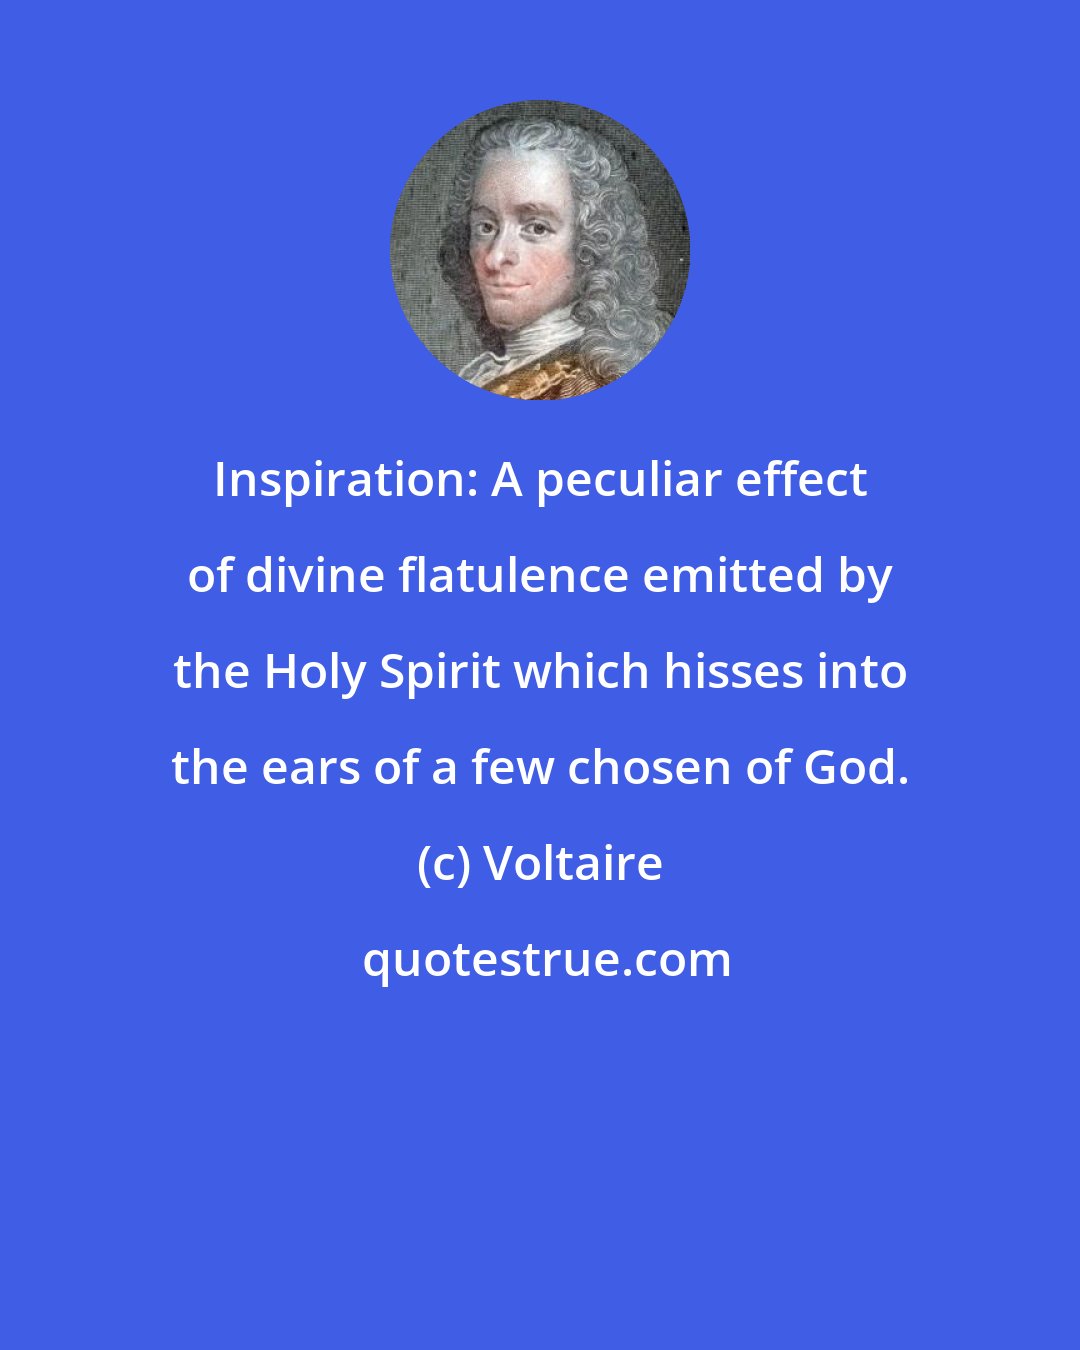 Voltaire: Inspiration: A peculiar effect of divine flatulence emitted by the Holy Spirit which hisses into the ears of a few chosen of God.